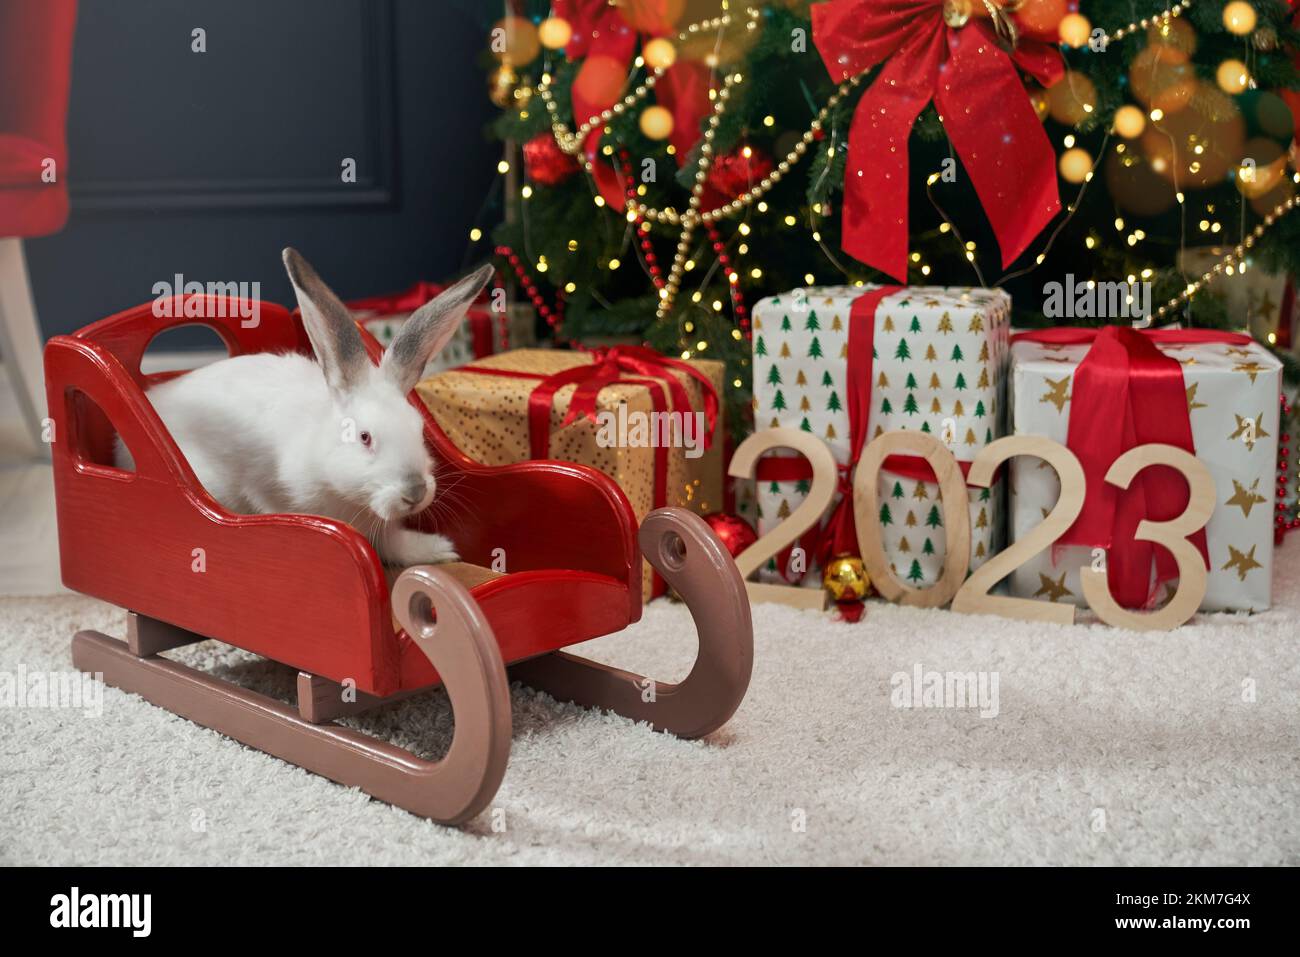 Side view of white, furry rabbit sitting on red sledge indoors. Animal, symbol of new year 2023 having photoshoot in decorated room. Concept of ew year and celebration. Stock Photo